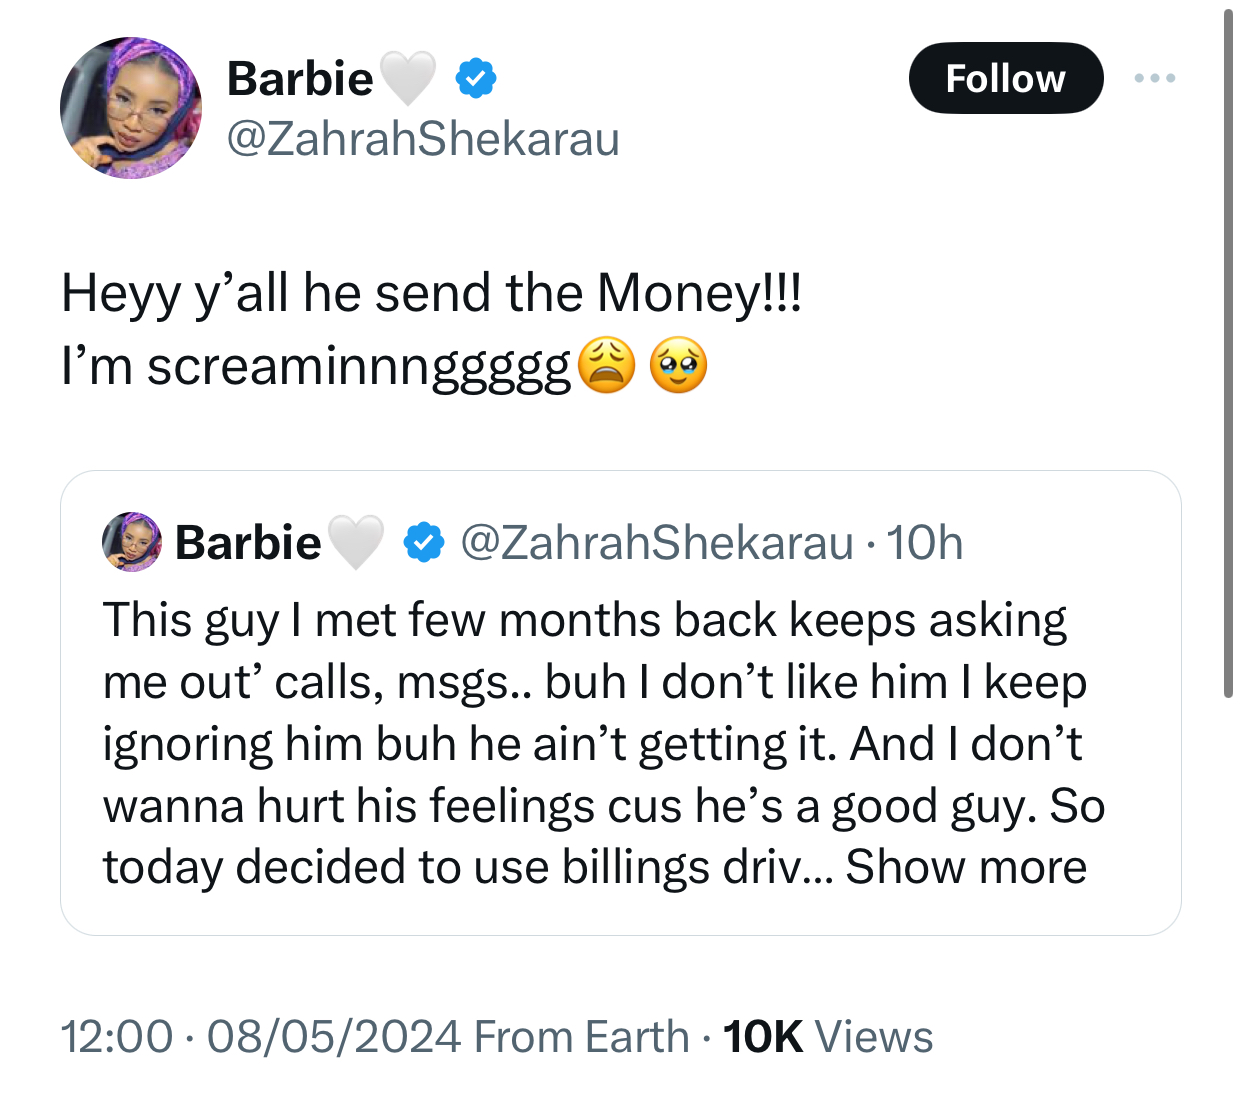 Nigerian lady shares receipts after X users doubted her claim that an admirer she is not interested in sent her some money